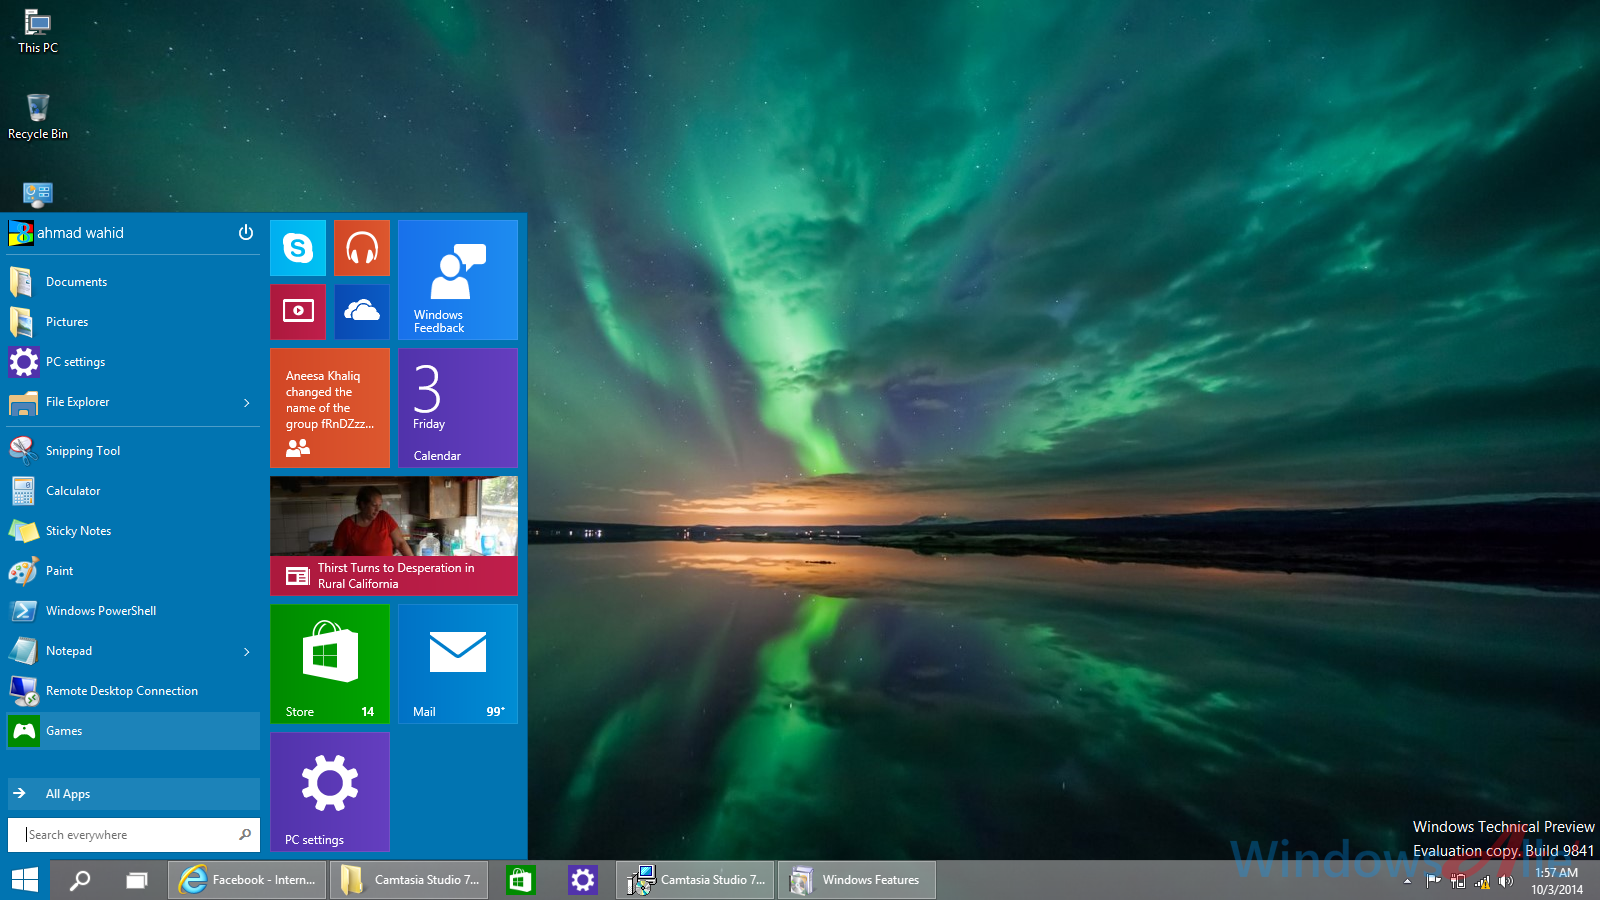 Free download Windows 10 Technical Preview Walkthrough of Start